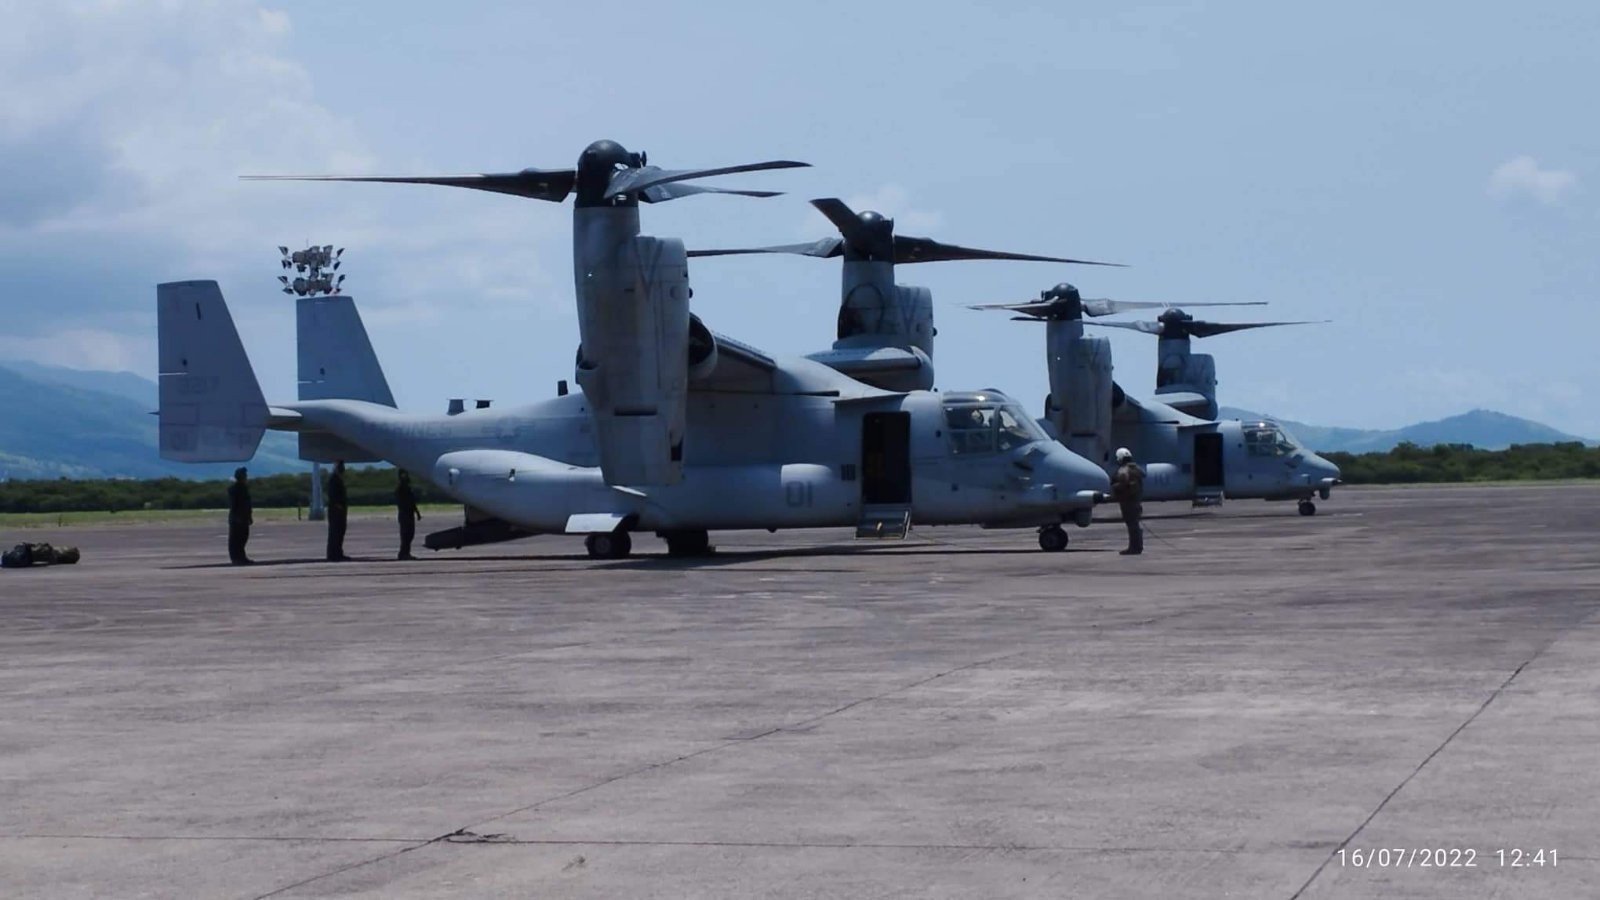 Second part of US-PH Marine Aviation Support Activity all set